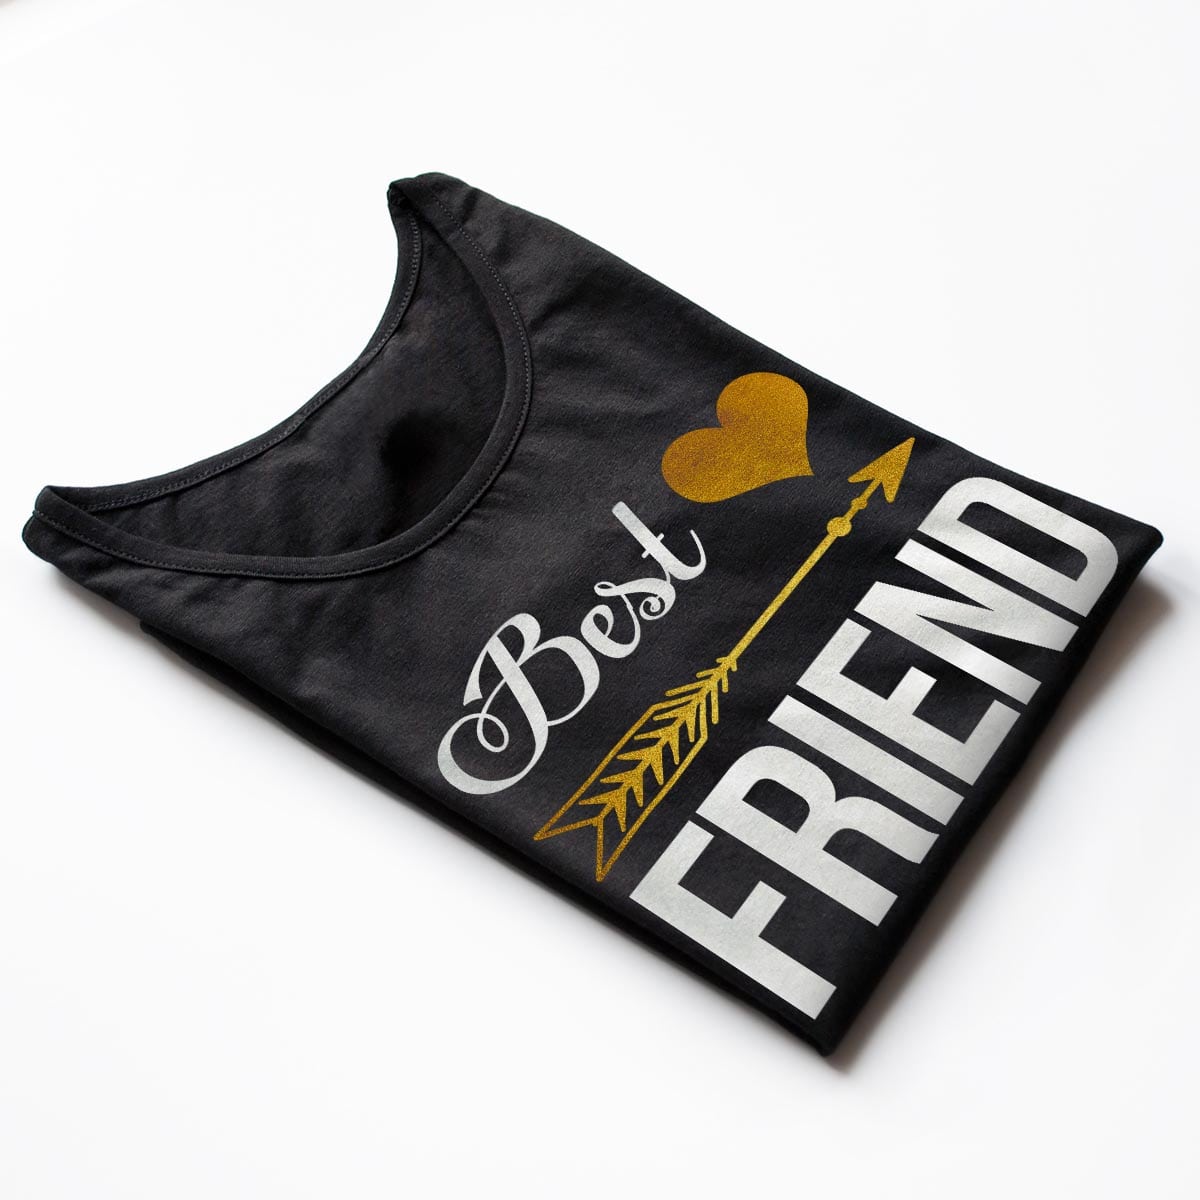 Tricouri BFF - Best Friends Forever - Gold